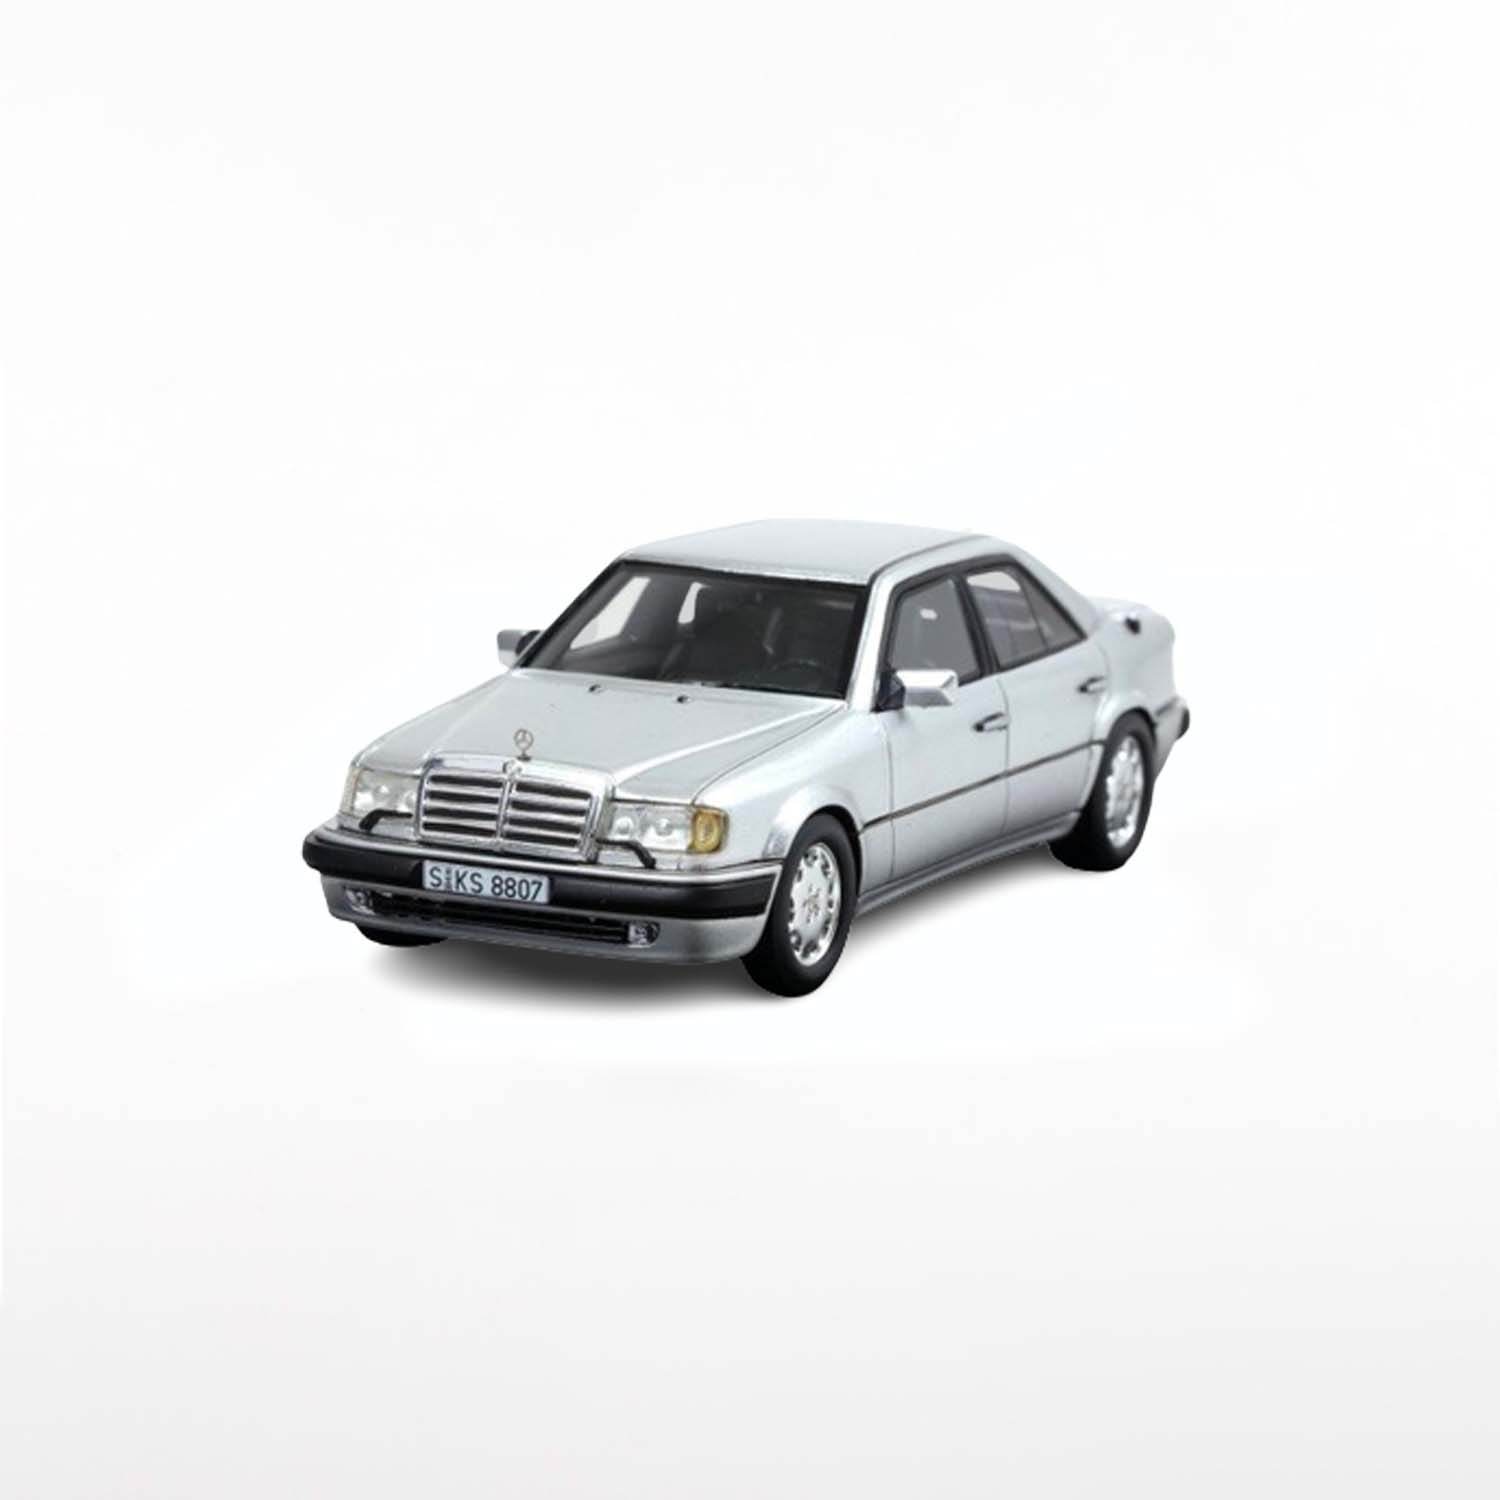 Mercedes-Benz E500 1986 | 1:43 Scale Model-1:43 Scale Model-Spark Models-gpx-store